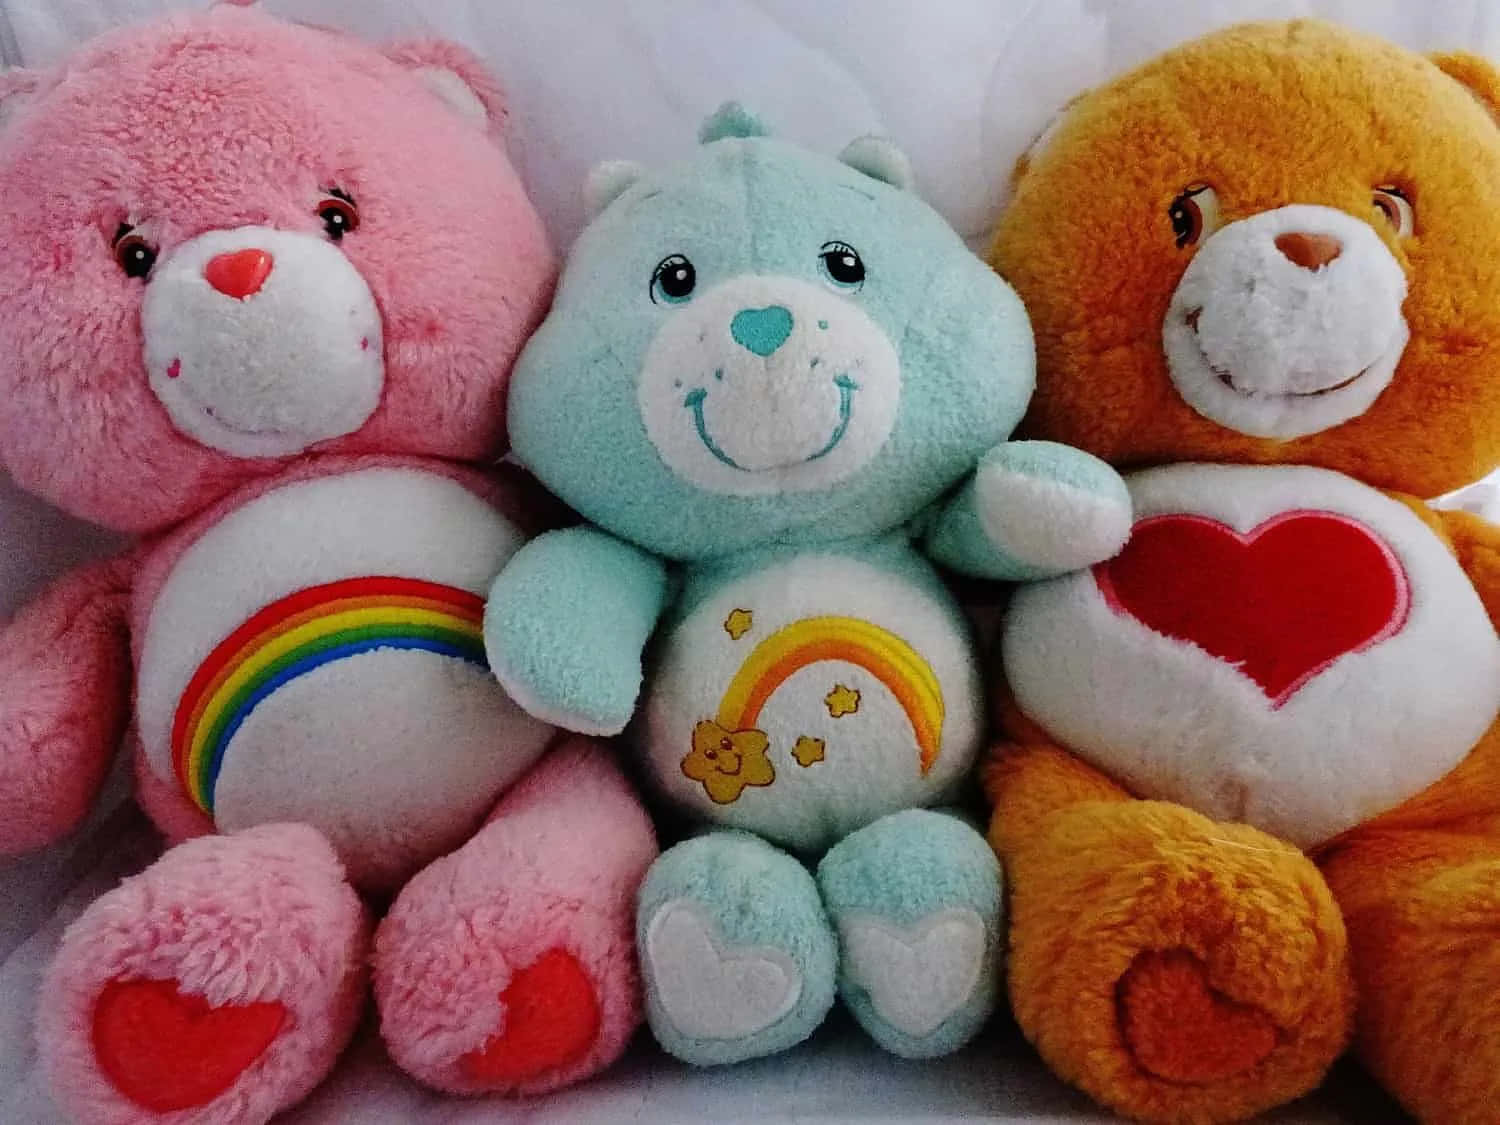 Get ready to explore the sunny skies with the Care Bears!